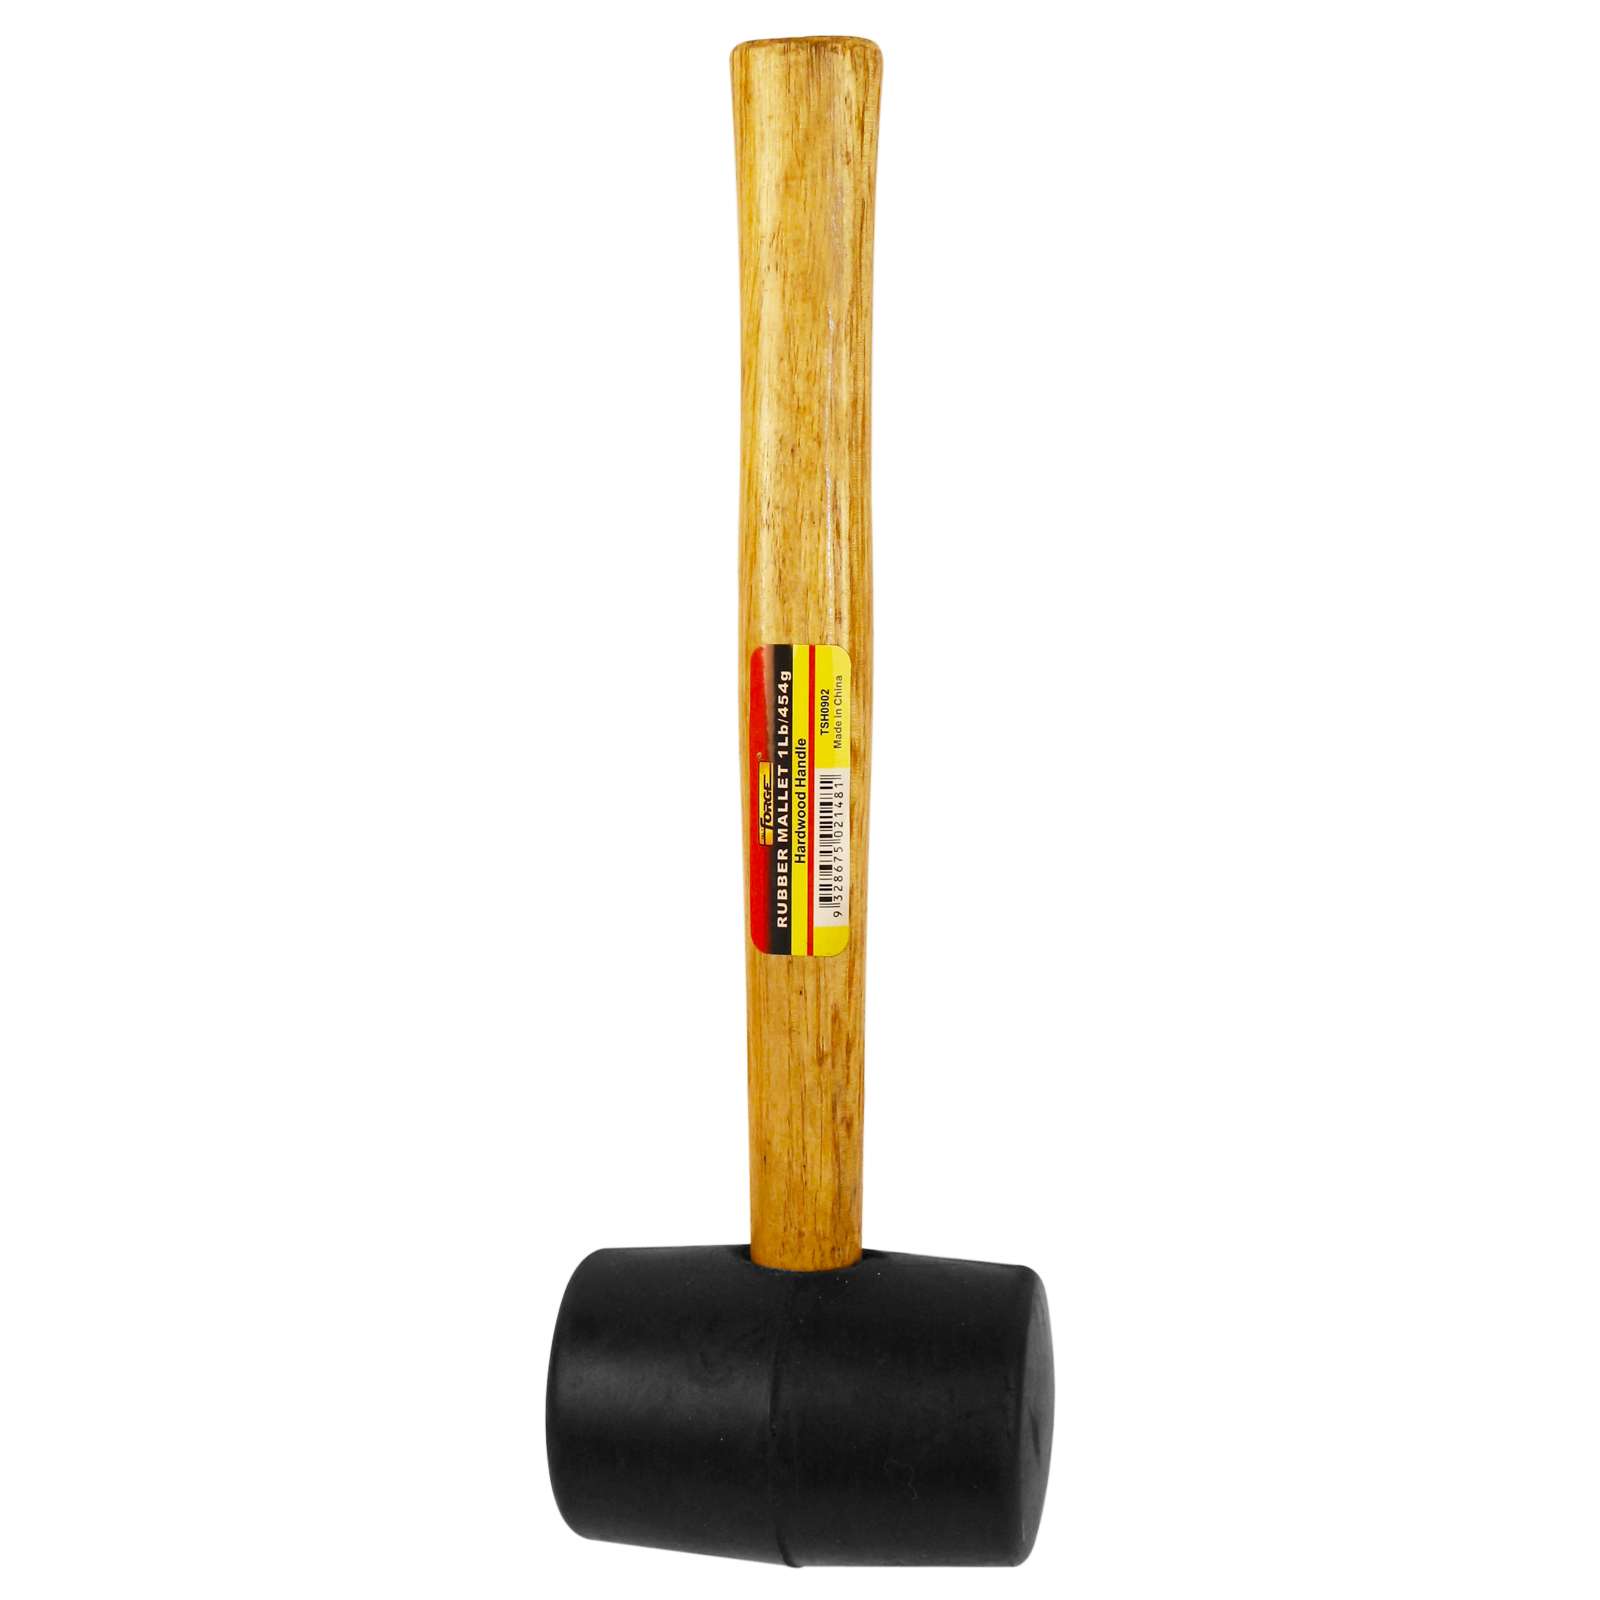 1 lb Solid Black Rubber Head Mallet with Wooden Handle - 4